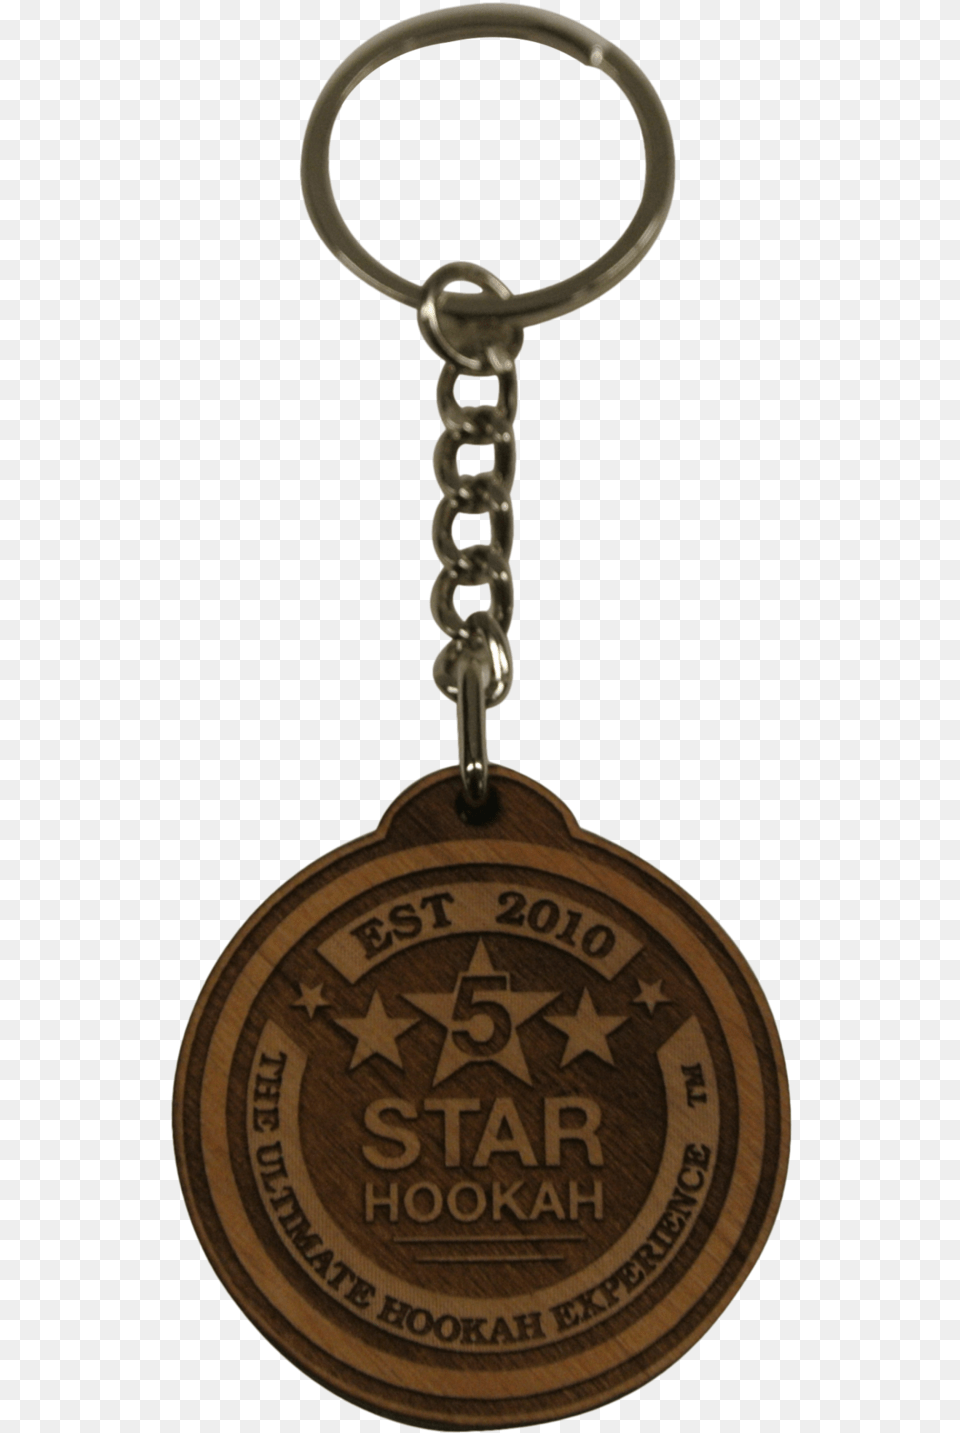 Star Hookah Wooden Round Key Chain Chain, Bronze, Accessories, Earring, Jewelry Free Png